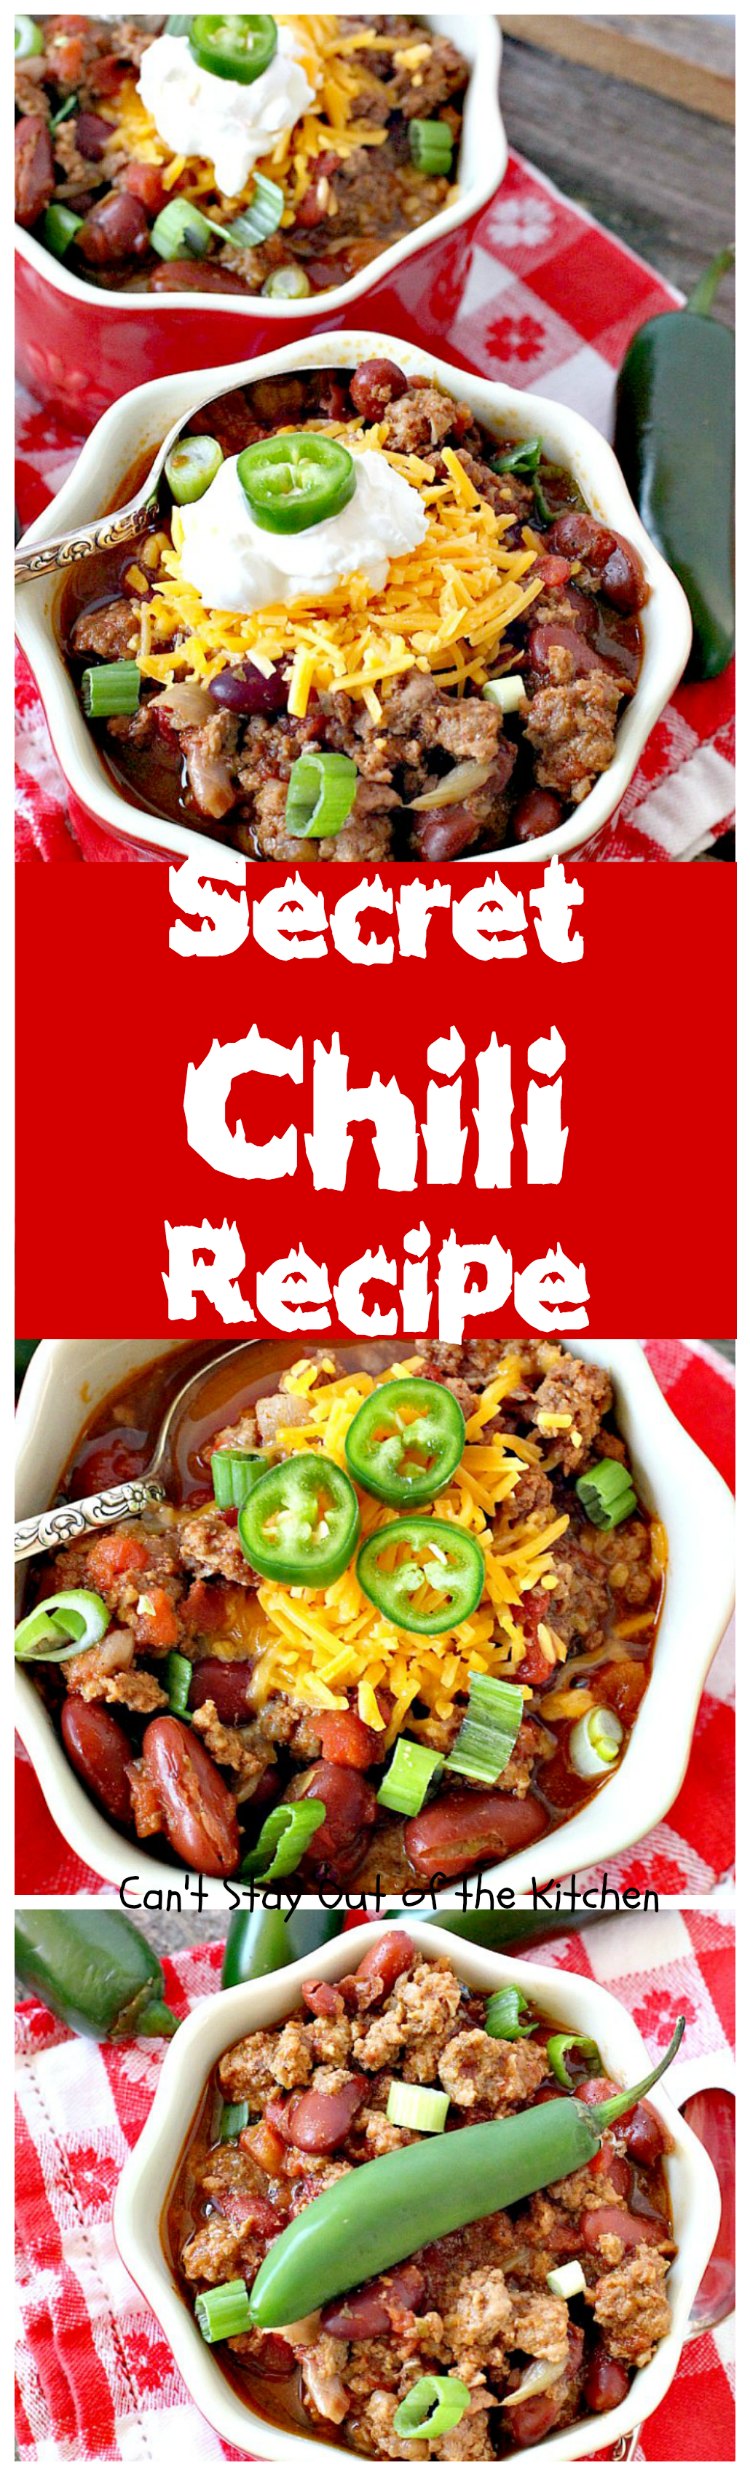 Secret Chili Recipe | Can't Stay Out of the KitchenSecret Chili Recipe | Can't Stay Out of the Kitchen